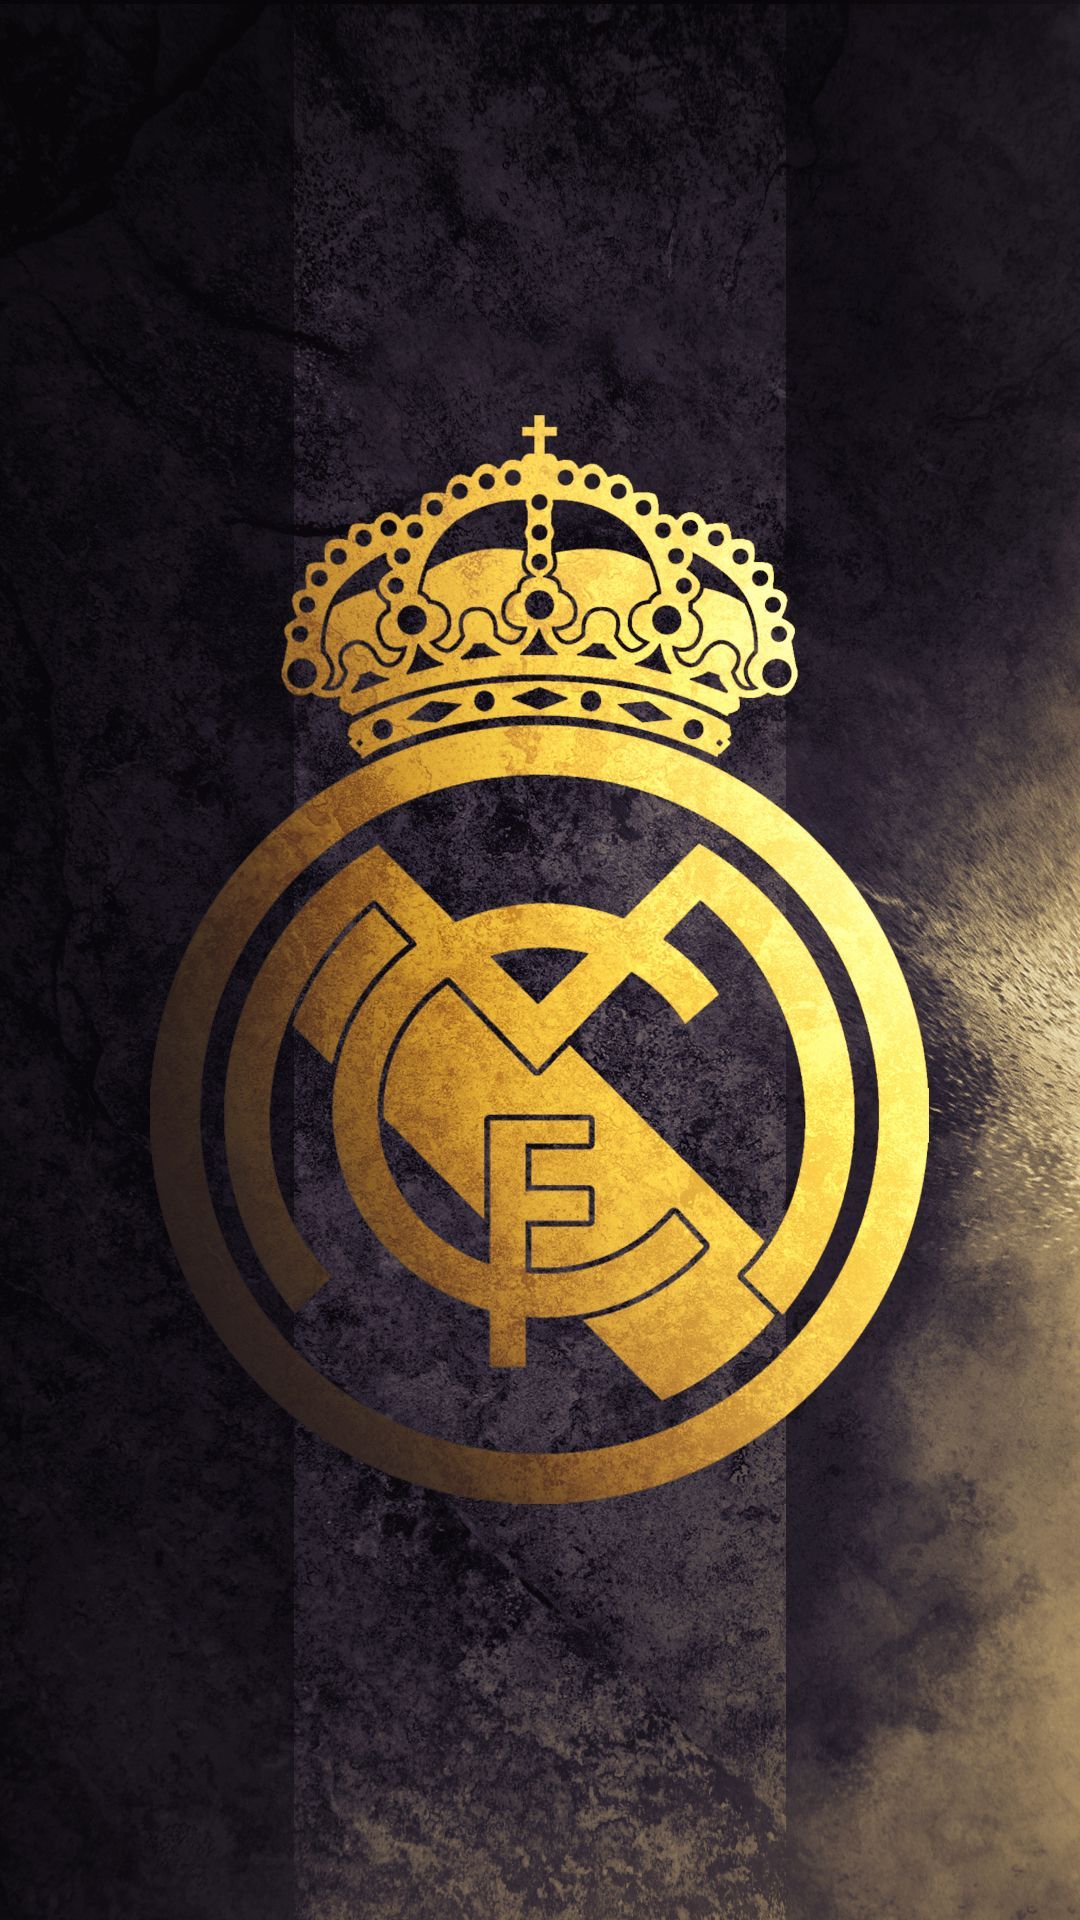 Real Madrid Wallpaper iPhone Games Wallpaper Ideas. Real